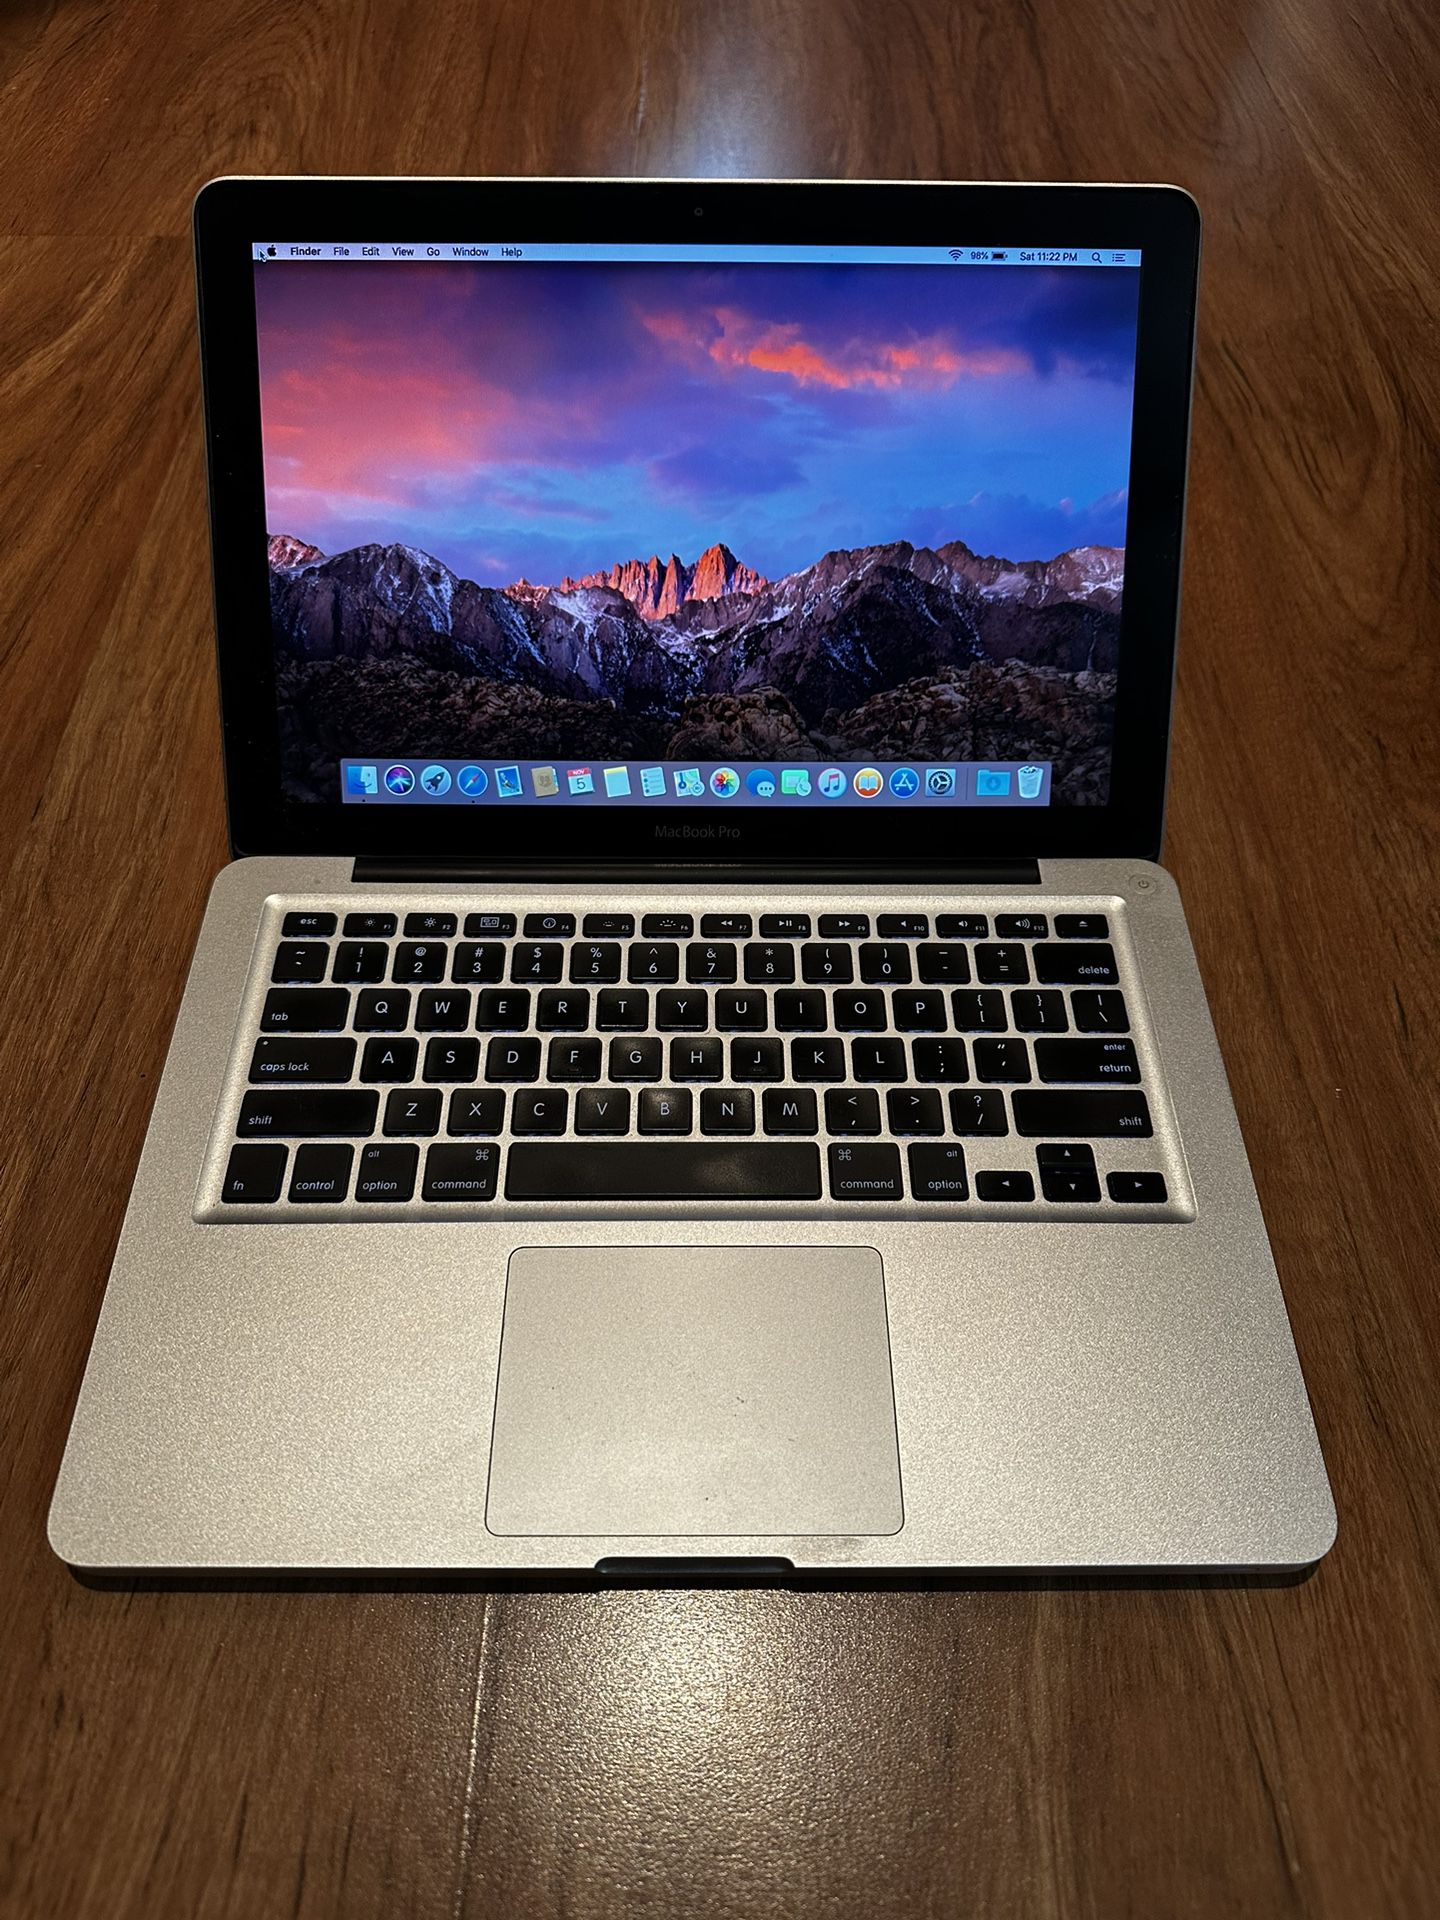 Apple MacBook Pro core i7 (13-inch Early 2011) mac OS High Sierra Version 10.13.6 16GB Ram 256GB SSD Drive with in Excellent Working co for in Aurora, IL - OfferUp